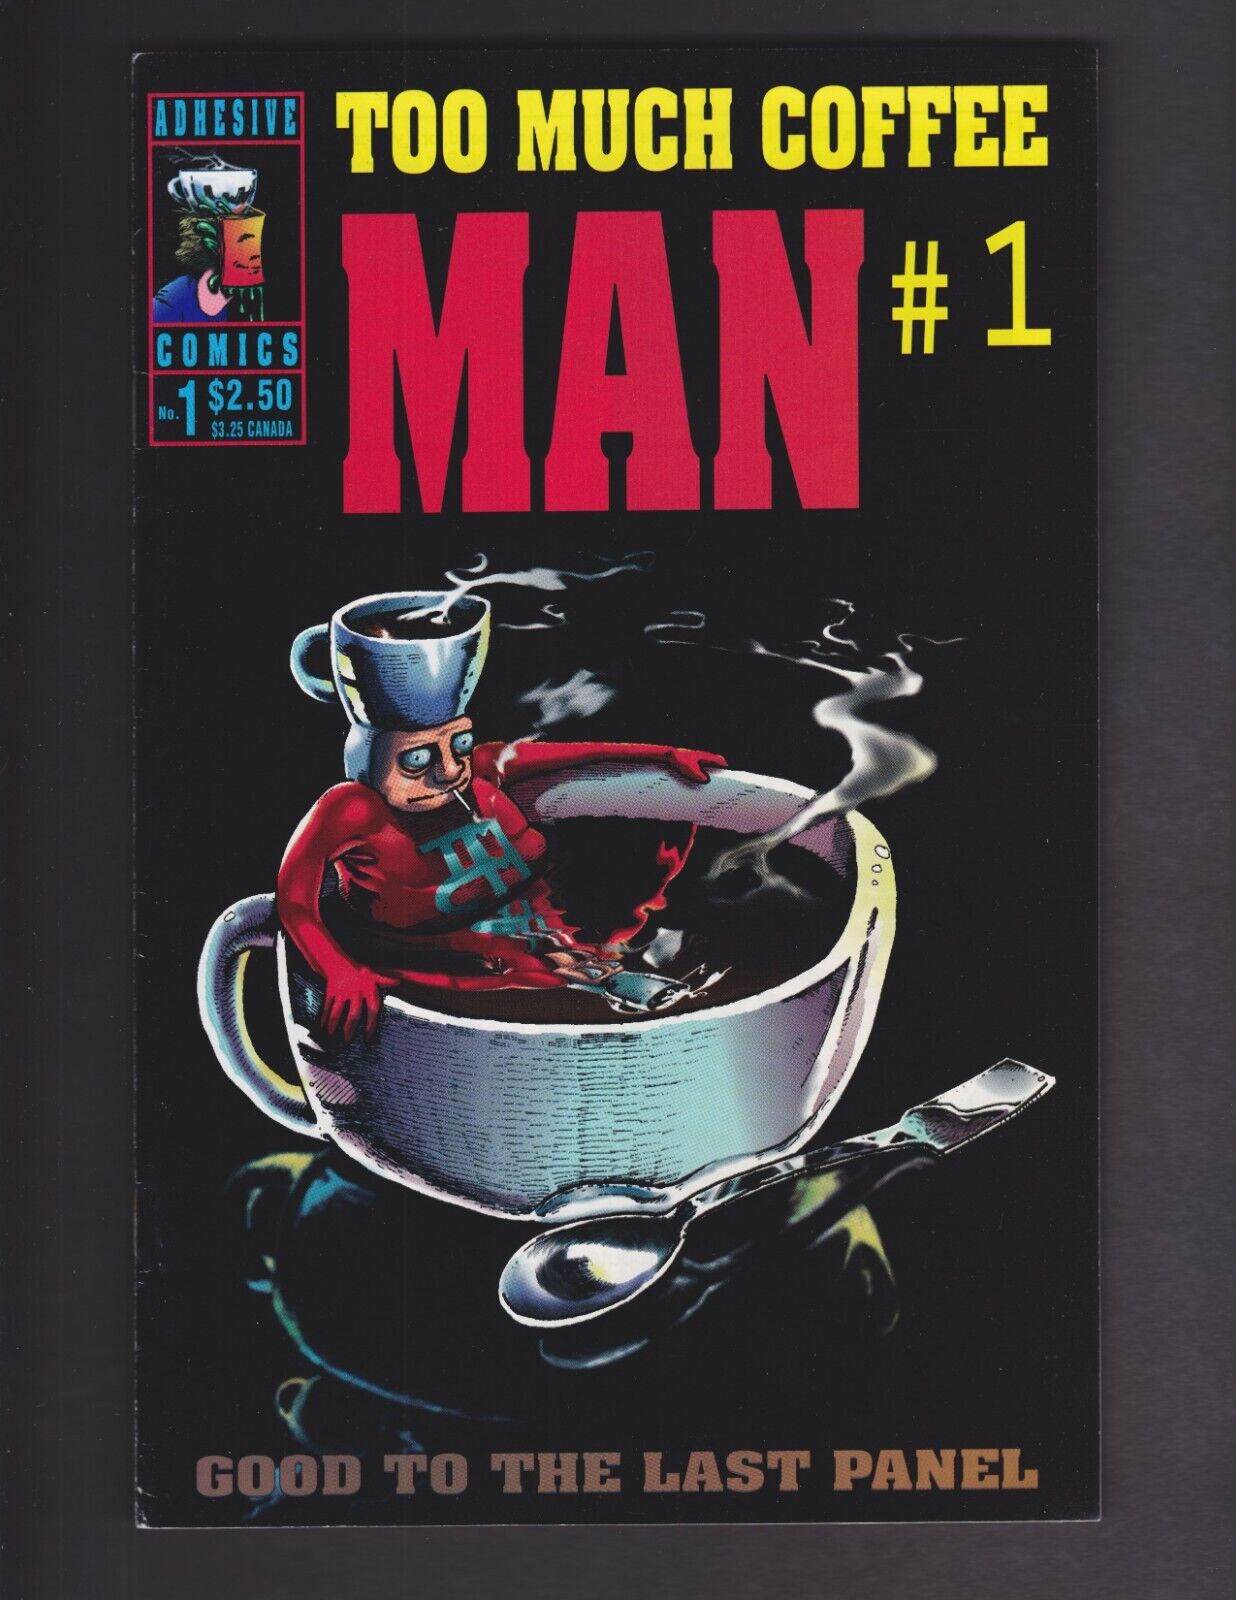 TOO MUCH COFFEE MAN #1 1993 1ST PRINTING SHANNON WHEELER 90s INDIE COMIC ART